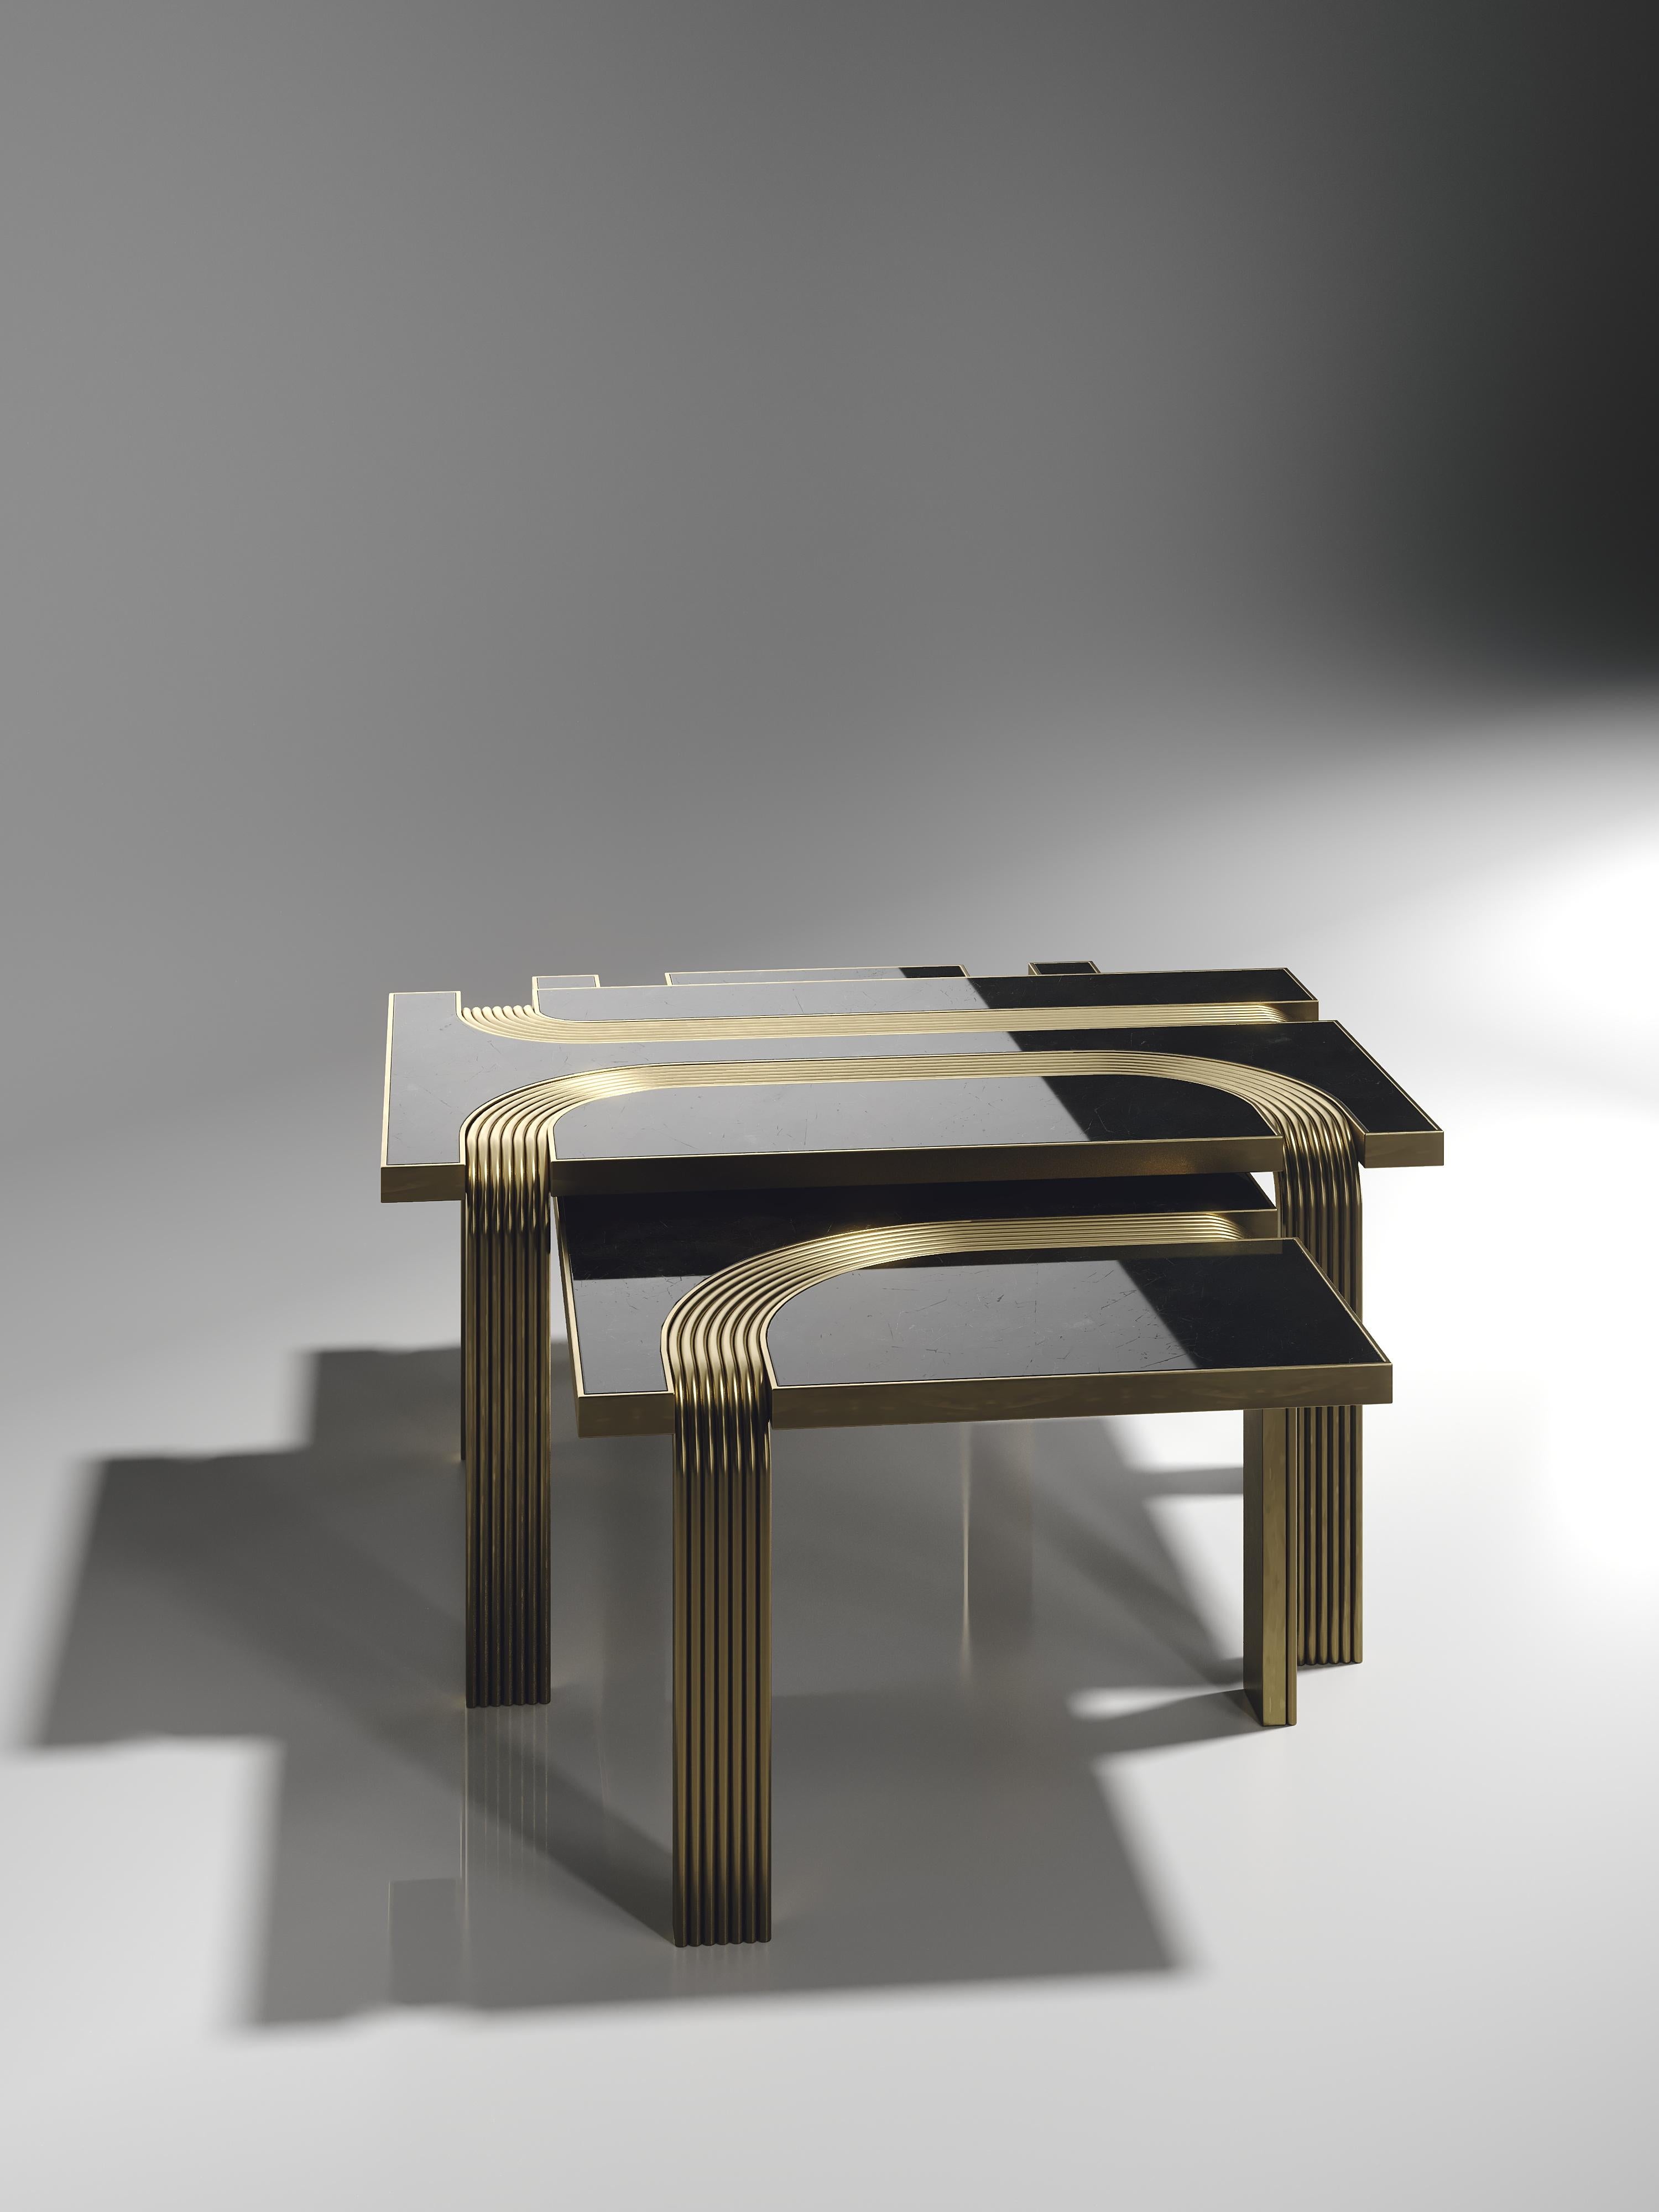 The Set of 2 Licol nesting coffee tables by R & Y Augousti in black pen shemm with bronze-patina brass details explore the brand's iconic DNA of bringing old world artisanal craft into a contemporary and utterly luxury feel. These tables nest